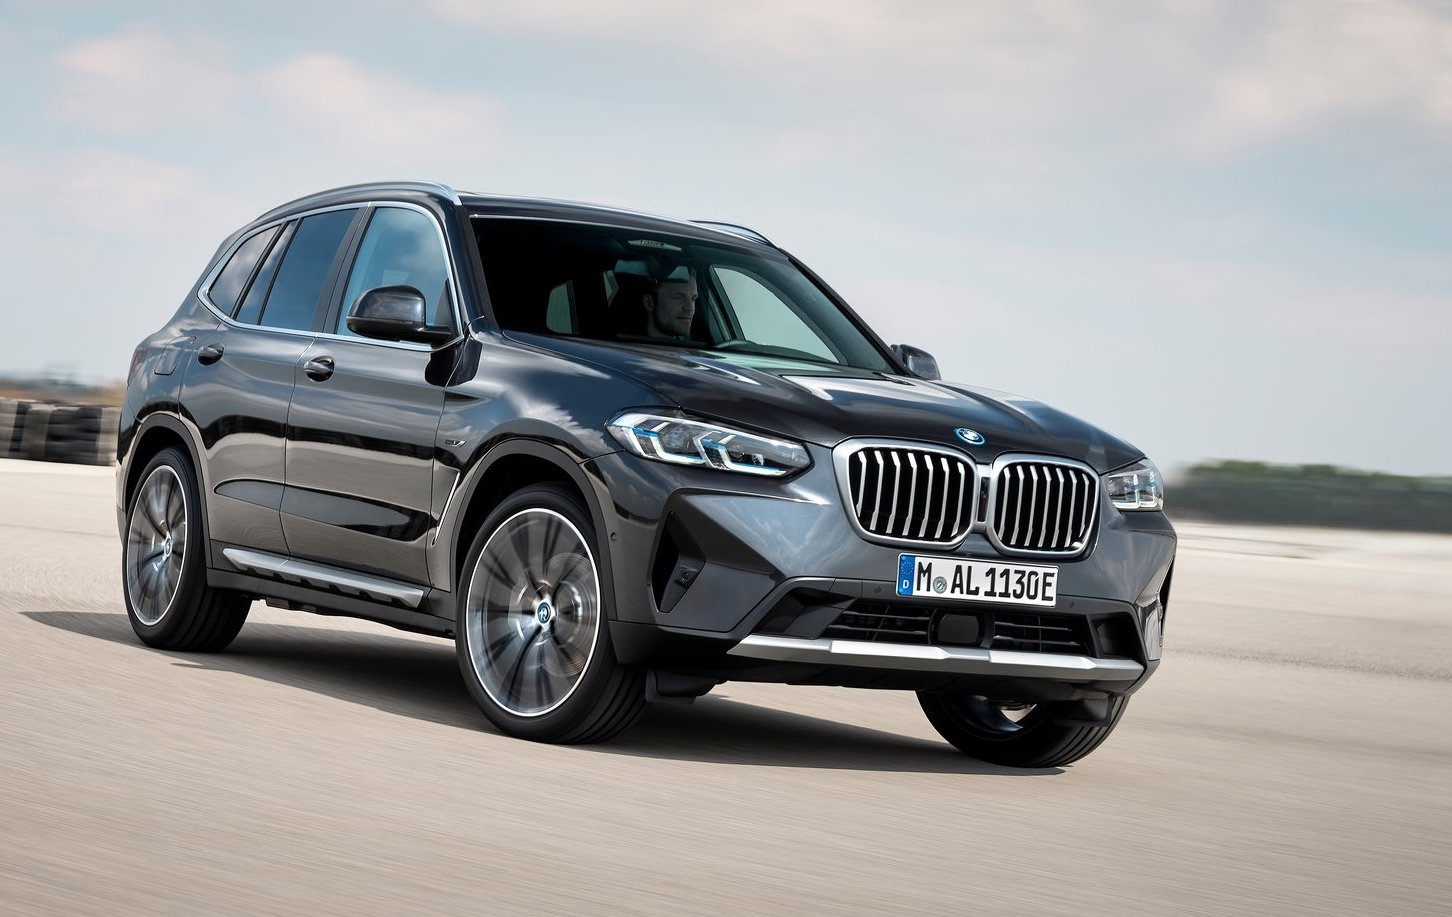 2022 BMW X3, X4 on sale in Australia from $73,900, arrives Q4